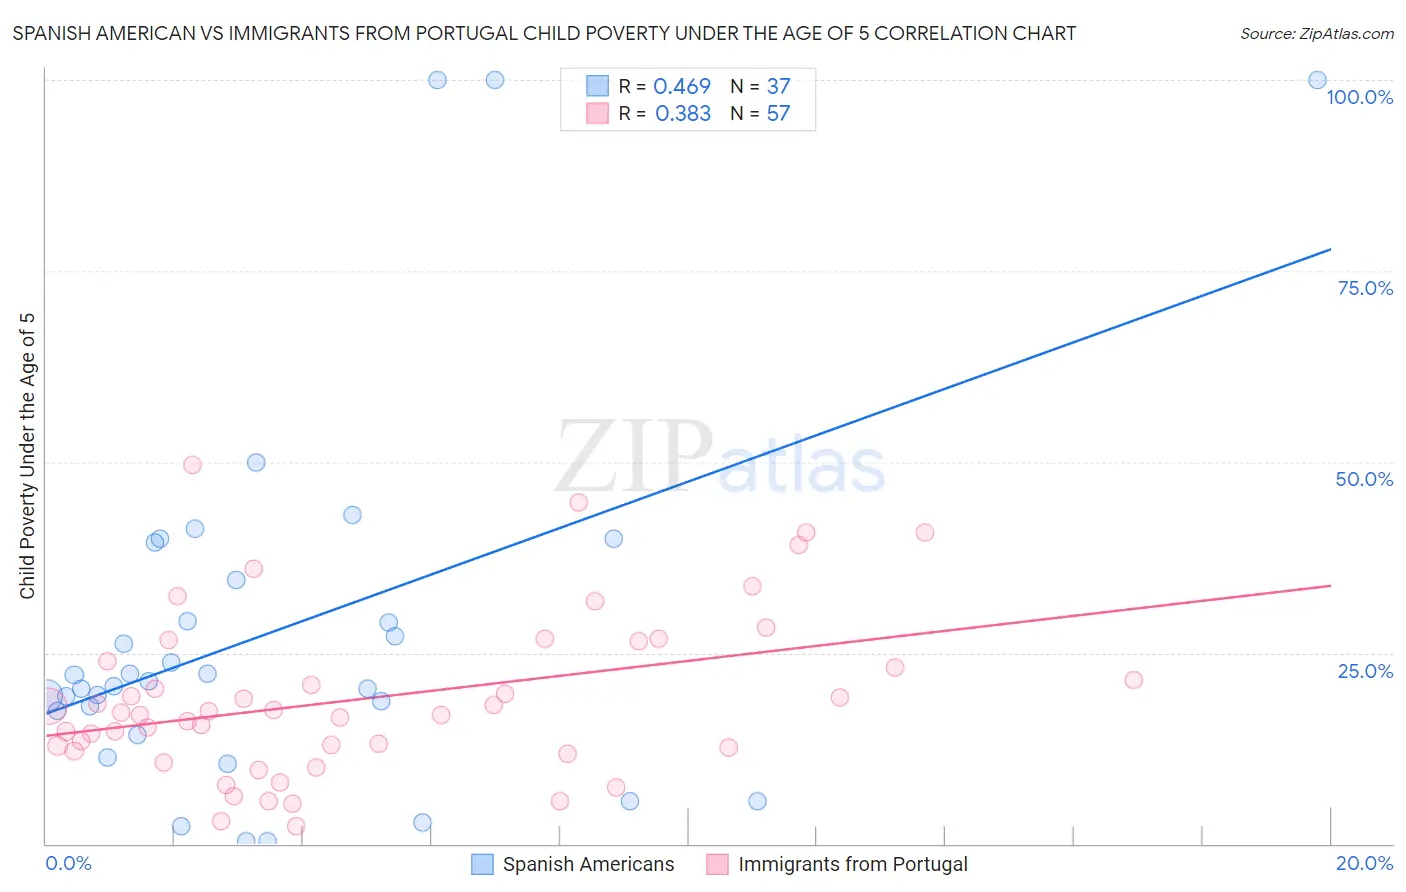 Spanish American vs Immigrants from Portugal Child Poverty Under the Age of 5